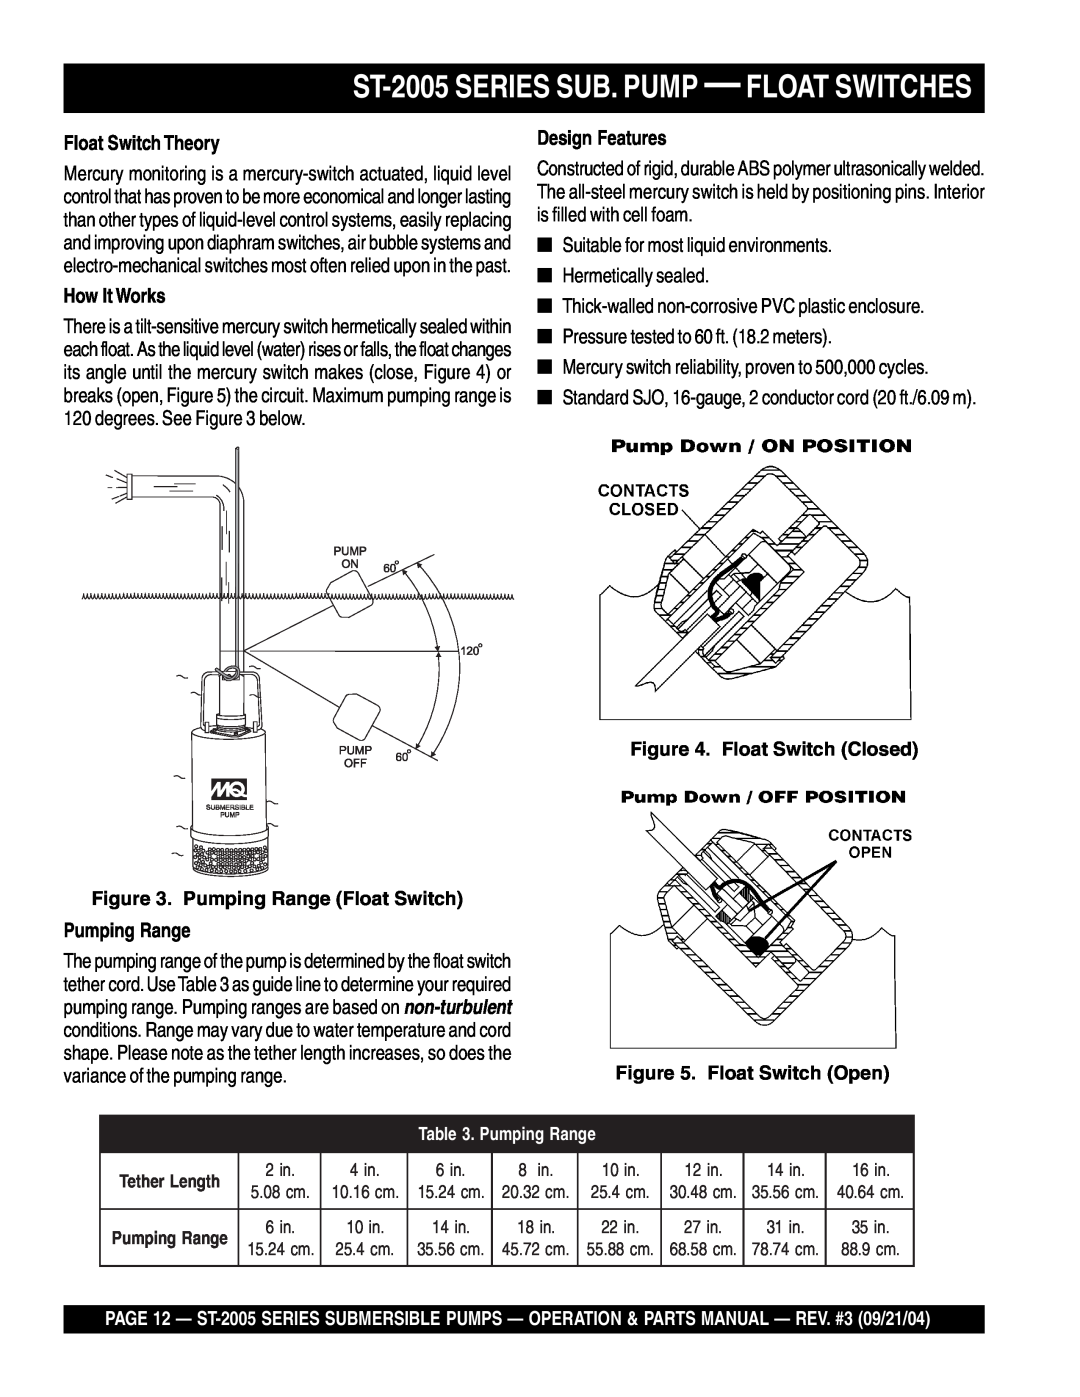 Multiquip ST-2005 SERIES SUB. PUMP - FLOAT SWITCHES, Float Switch Theory, How It Works, Design Features, Pumping Range 